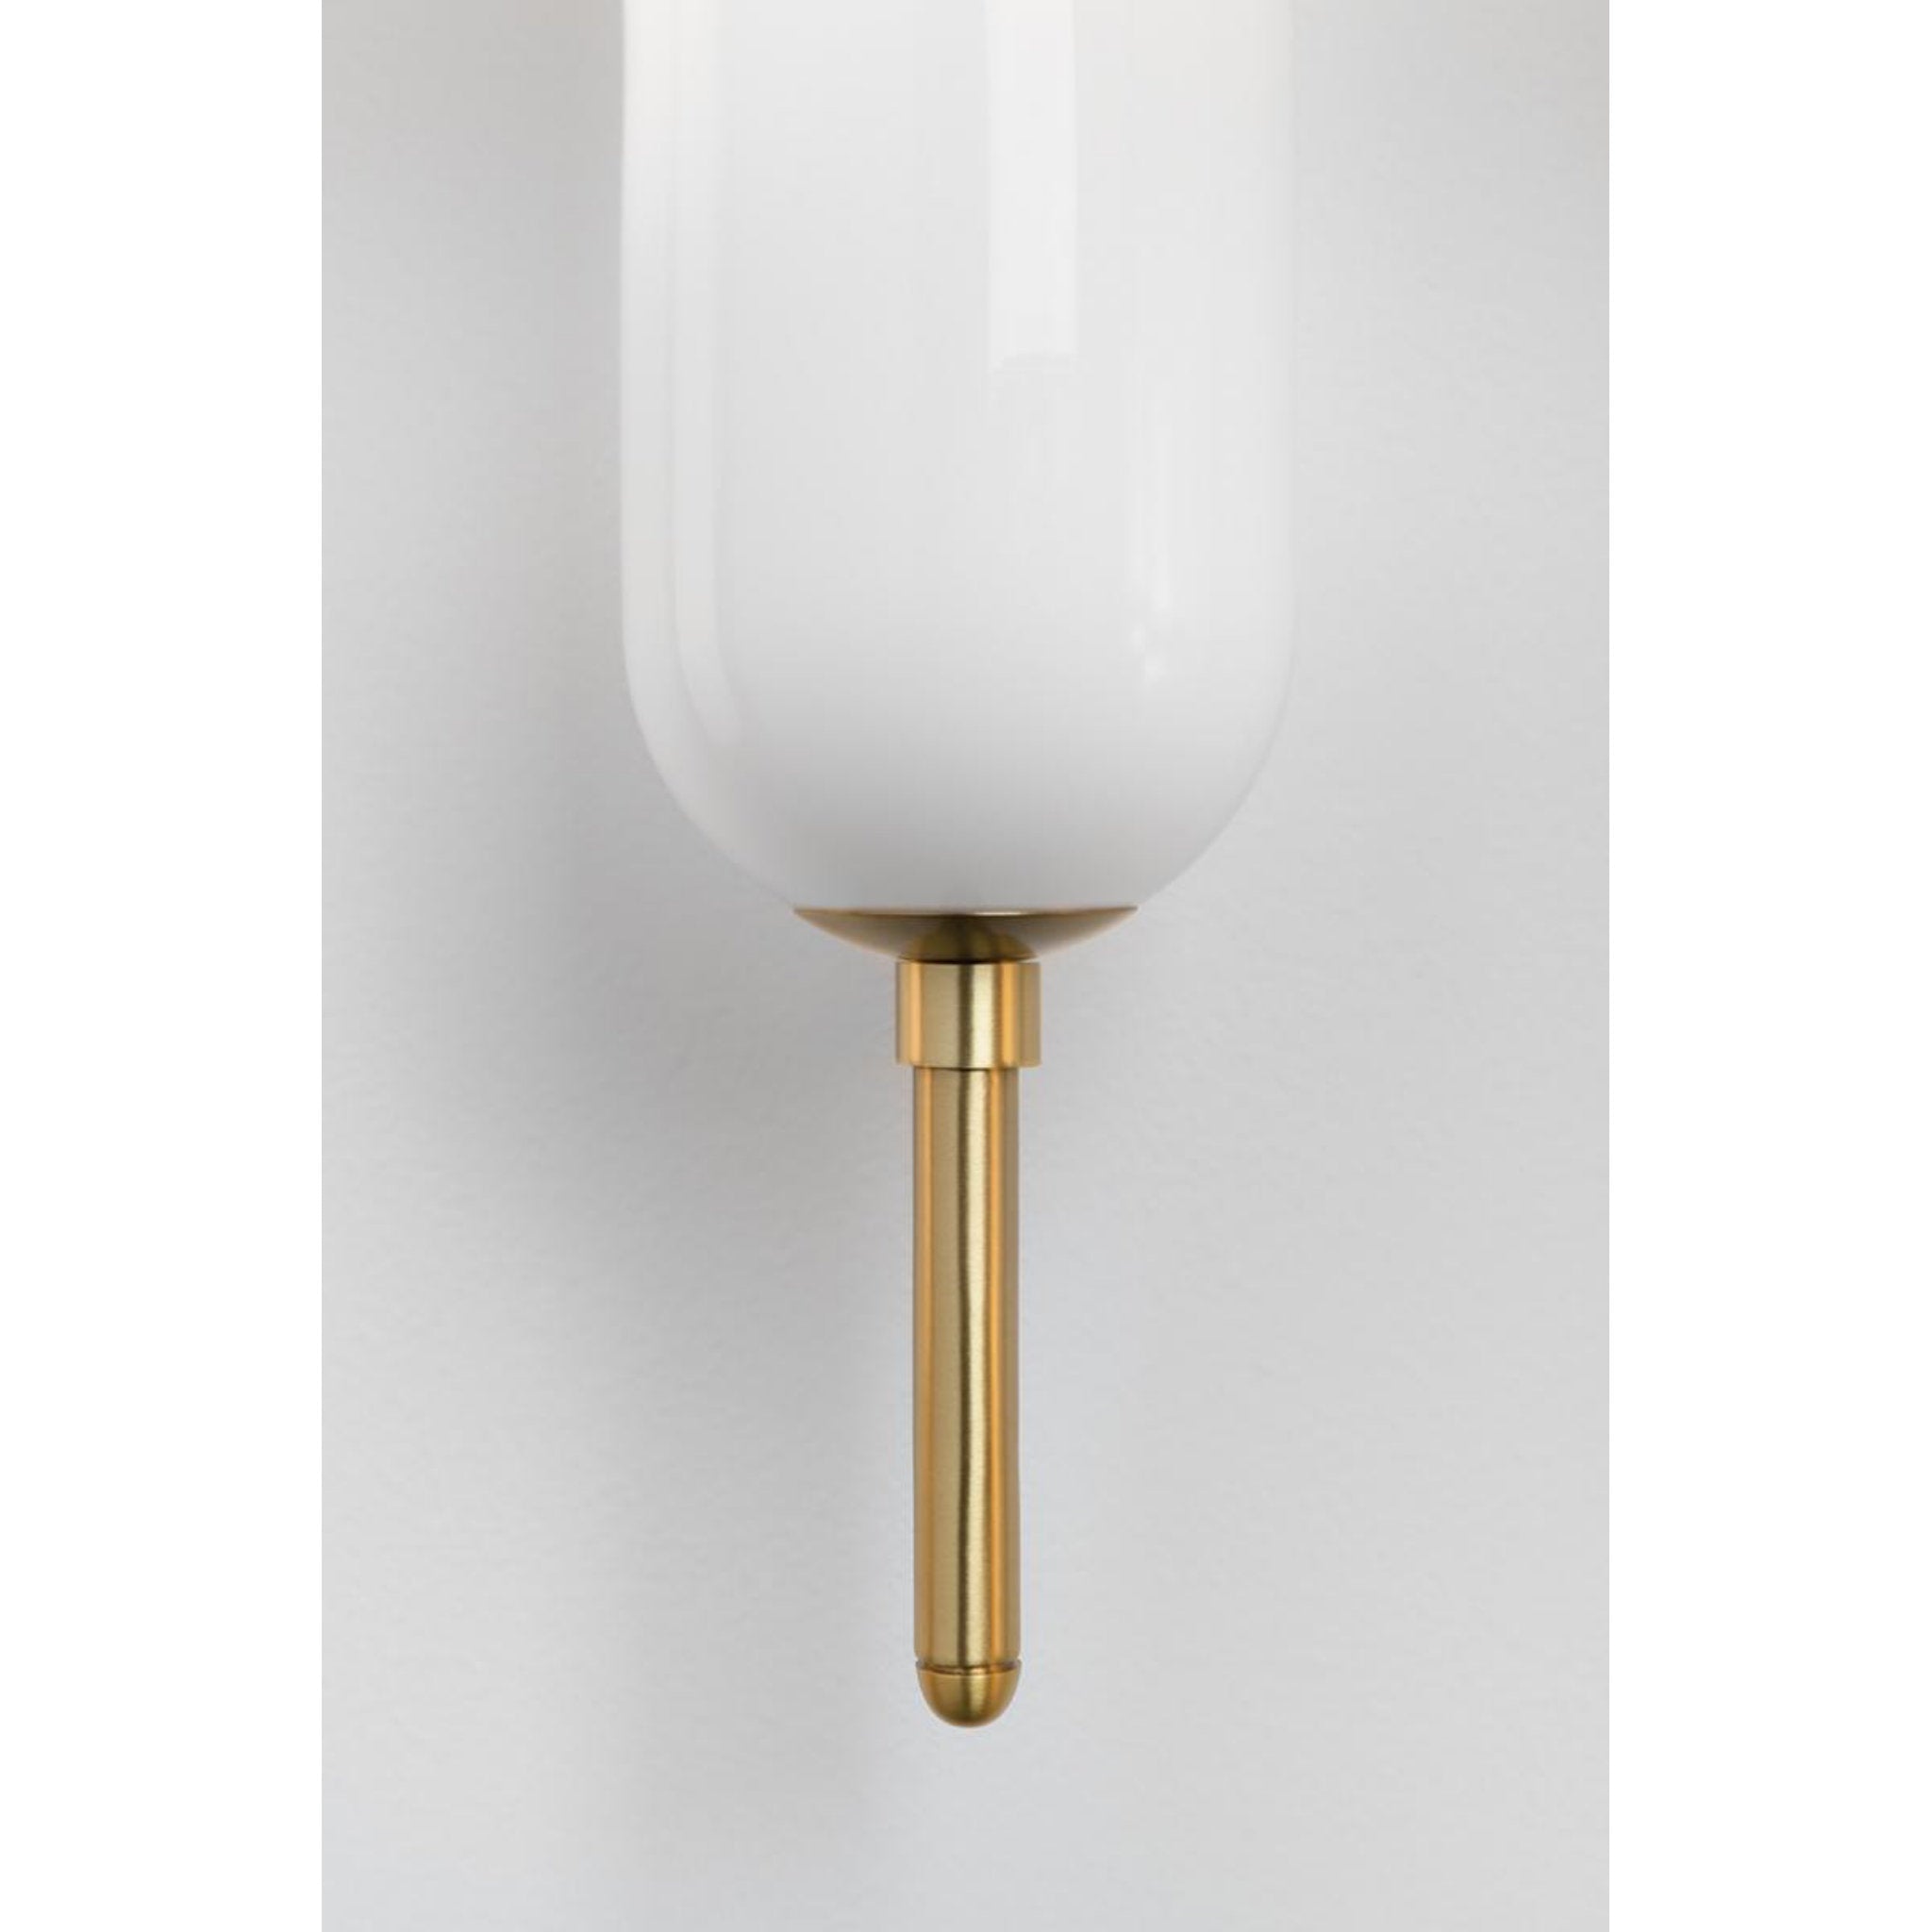 Miley 1-Light Wall Sconce in Polished Nickel